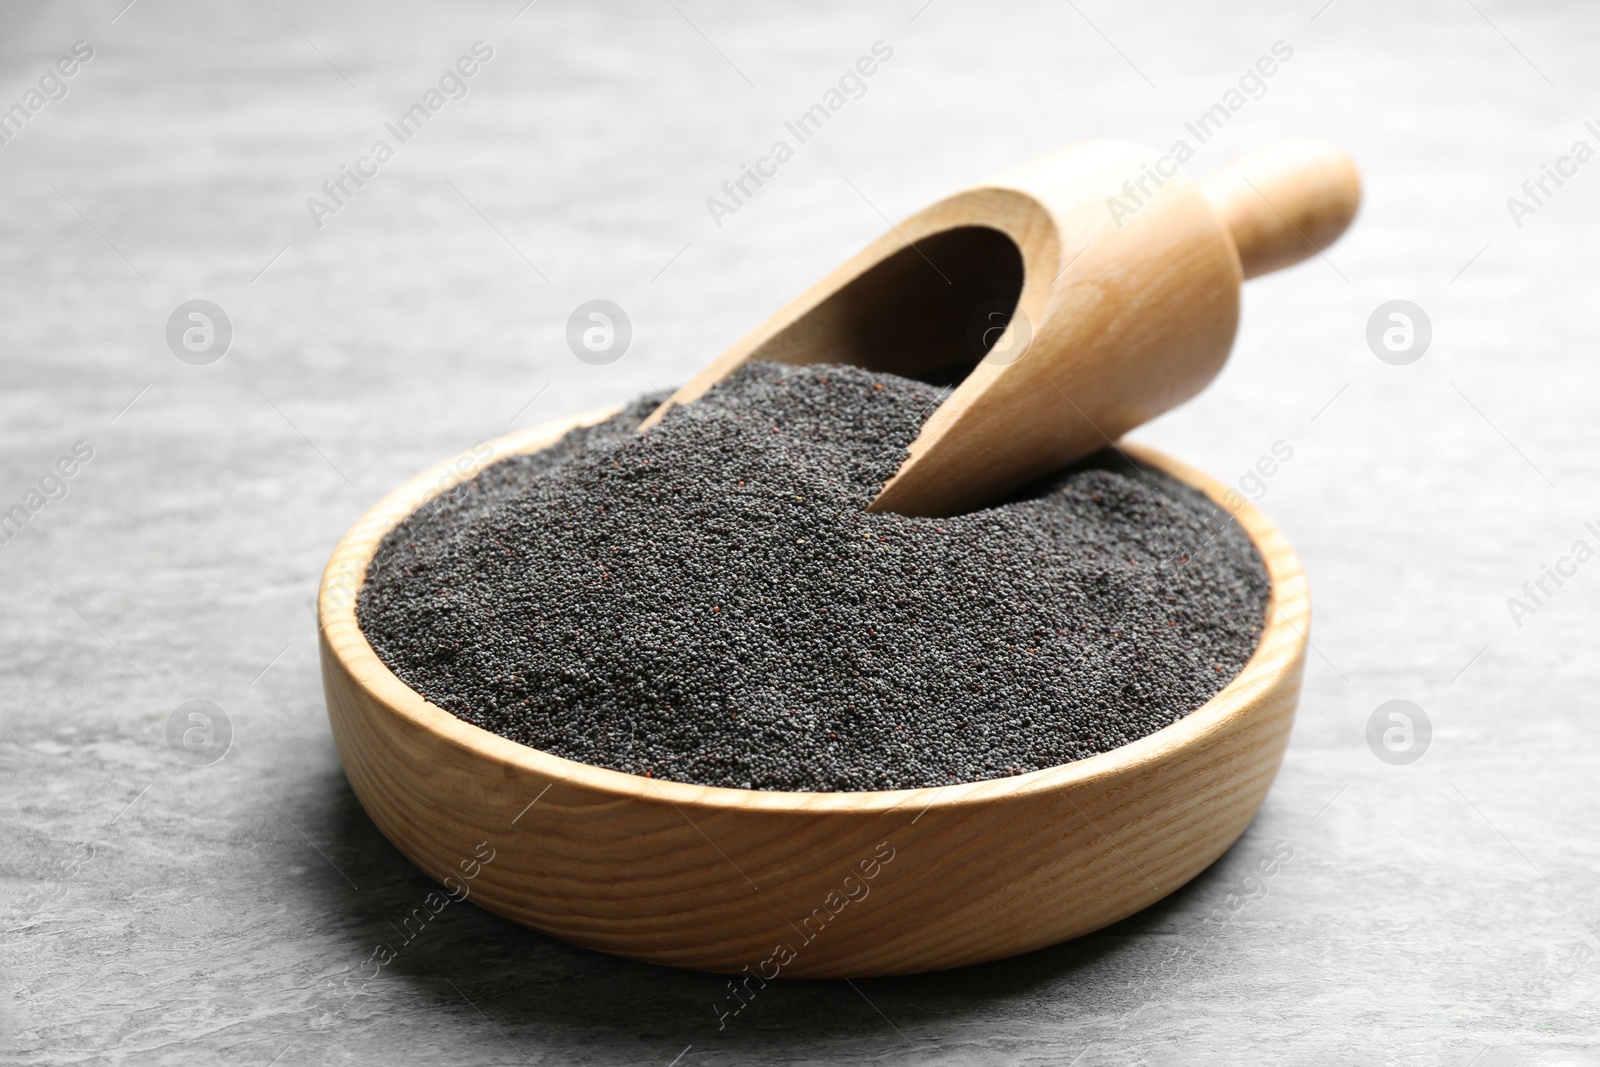 Photo of Poppy seeds and scoop in bowl on grey table